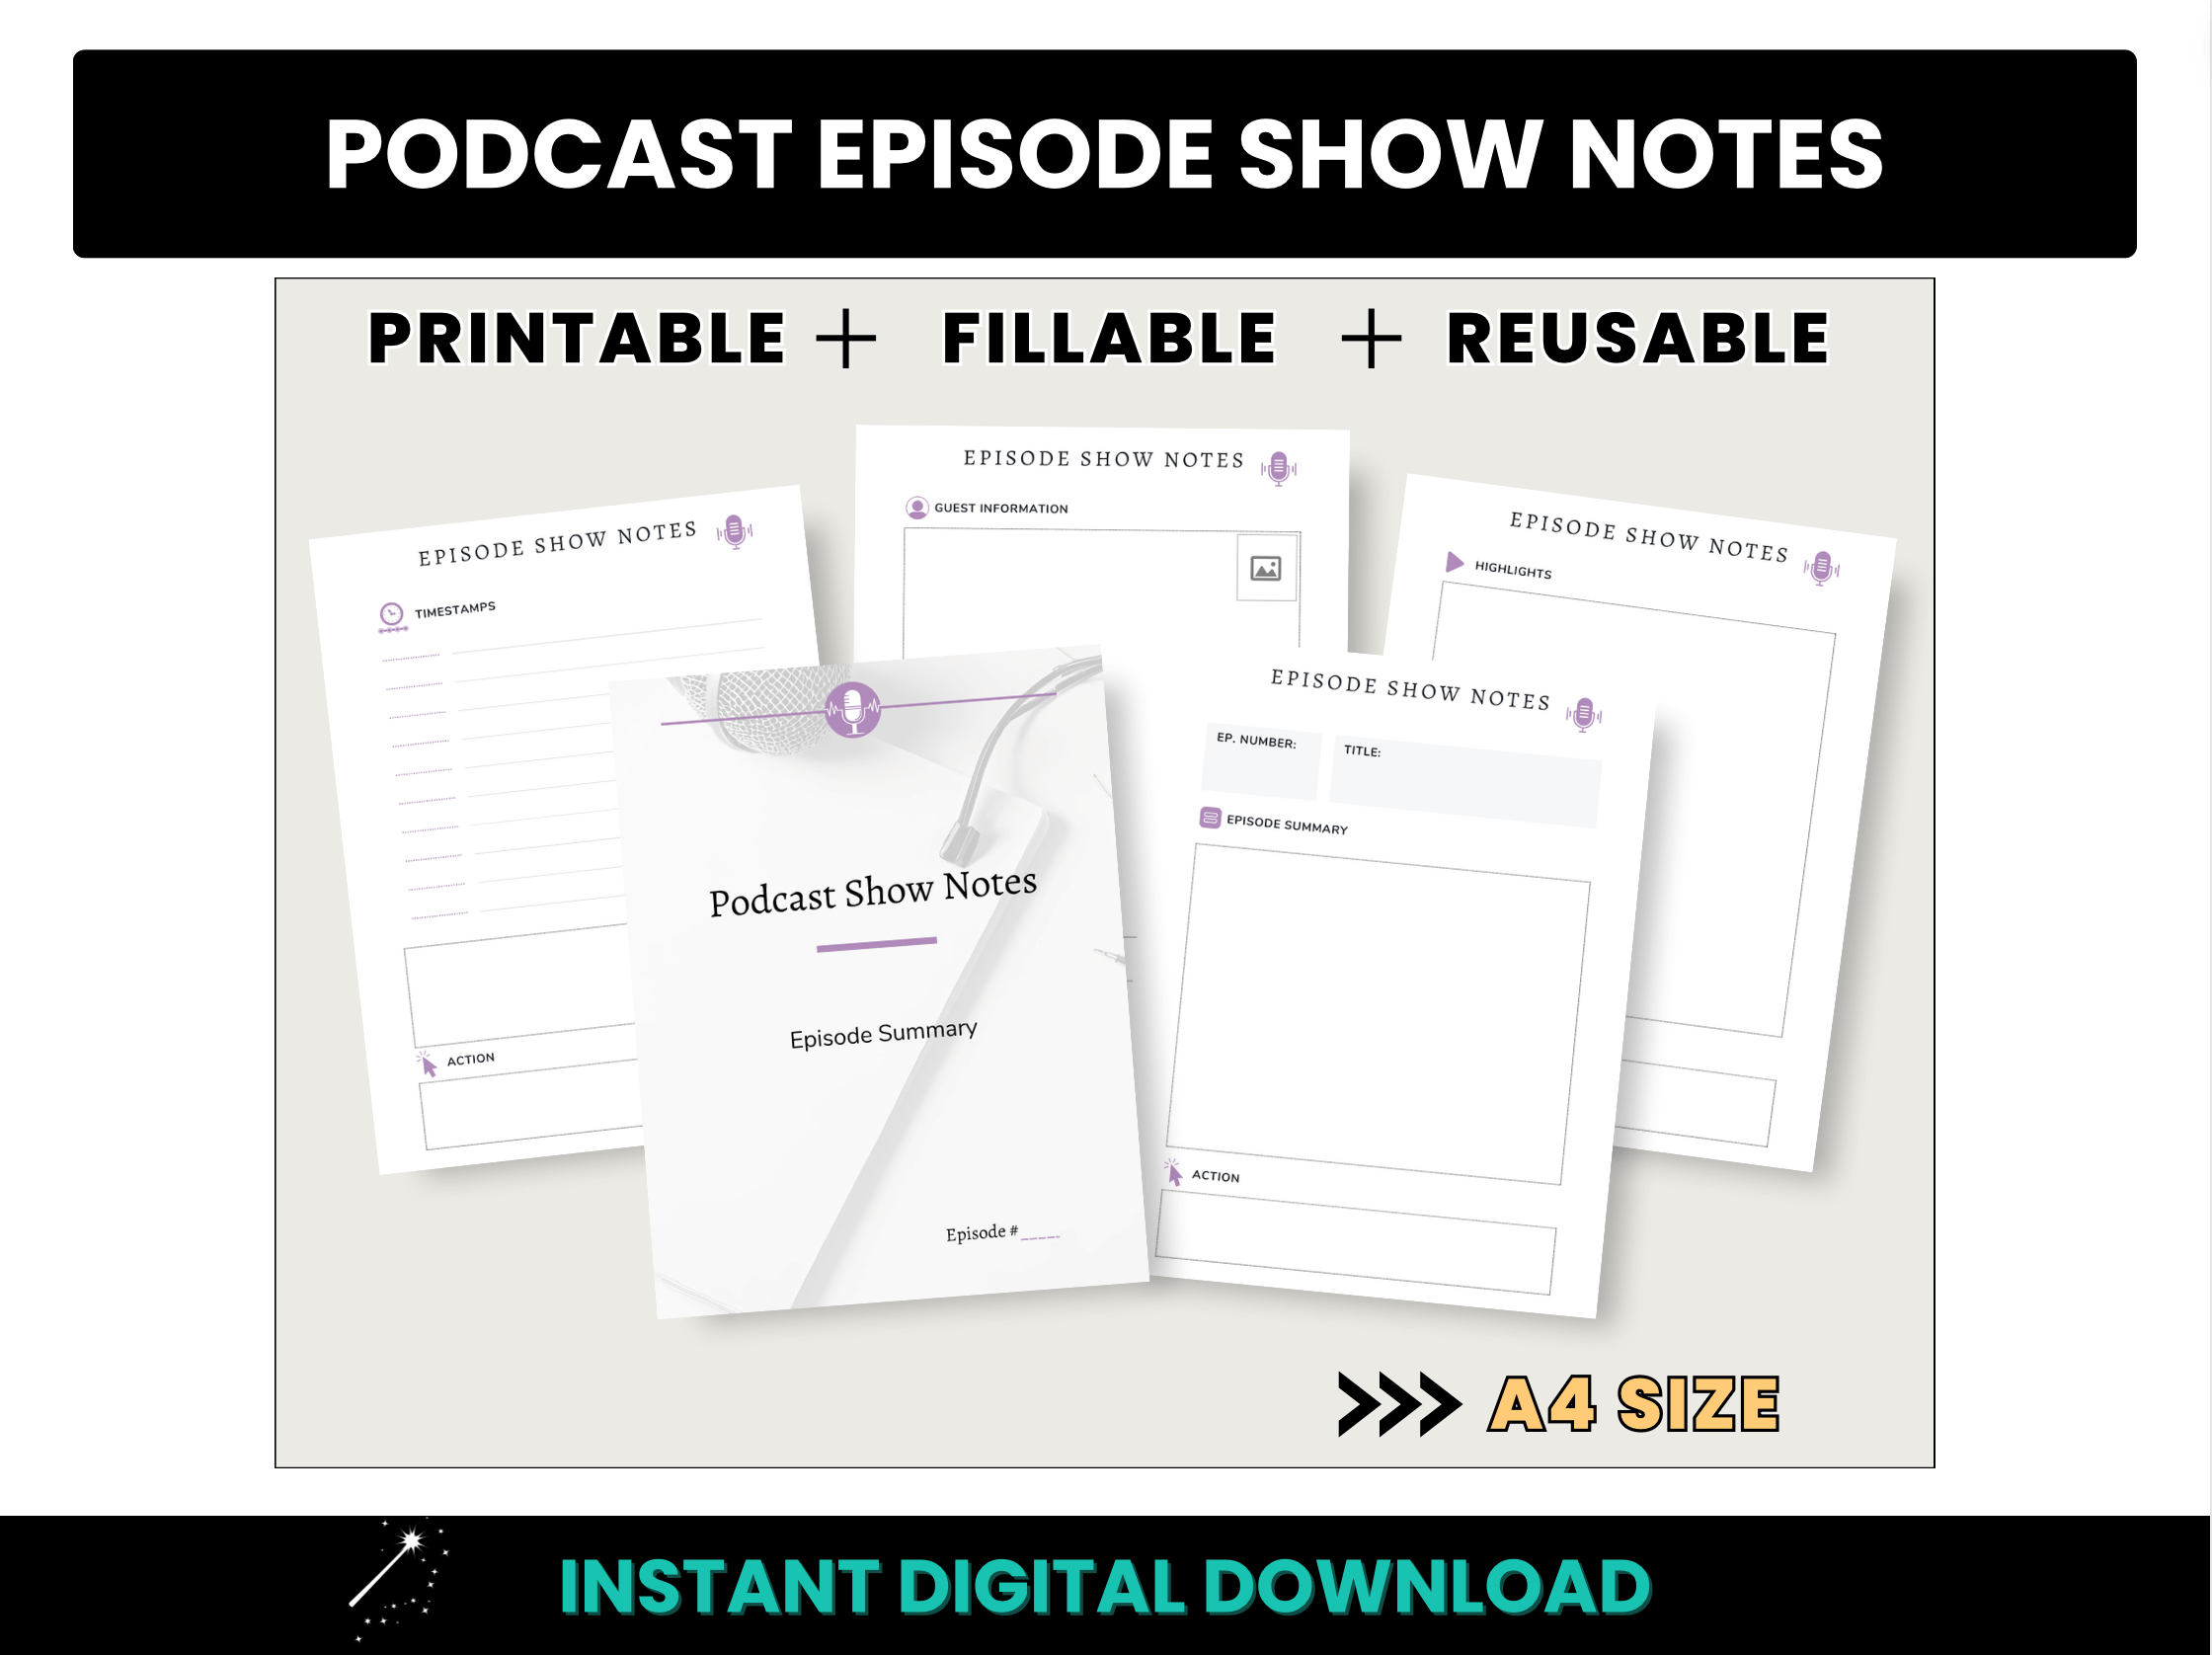 A4 Size Podcast Episode Show Notes Template